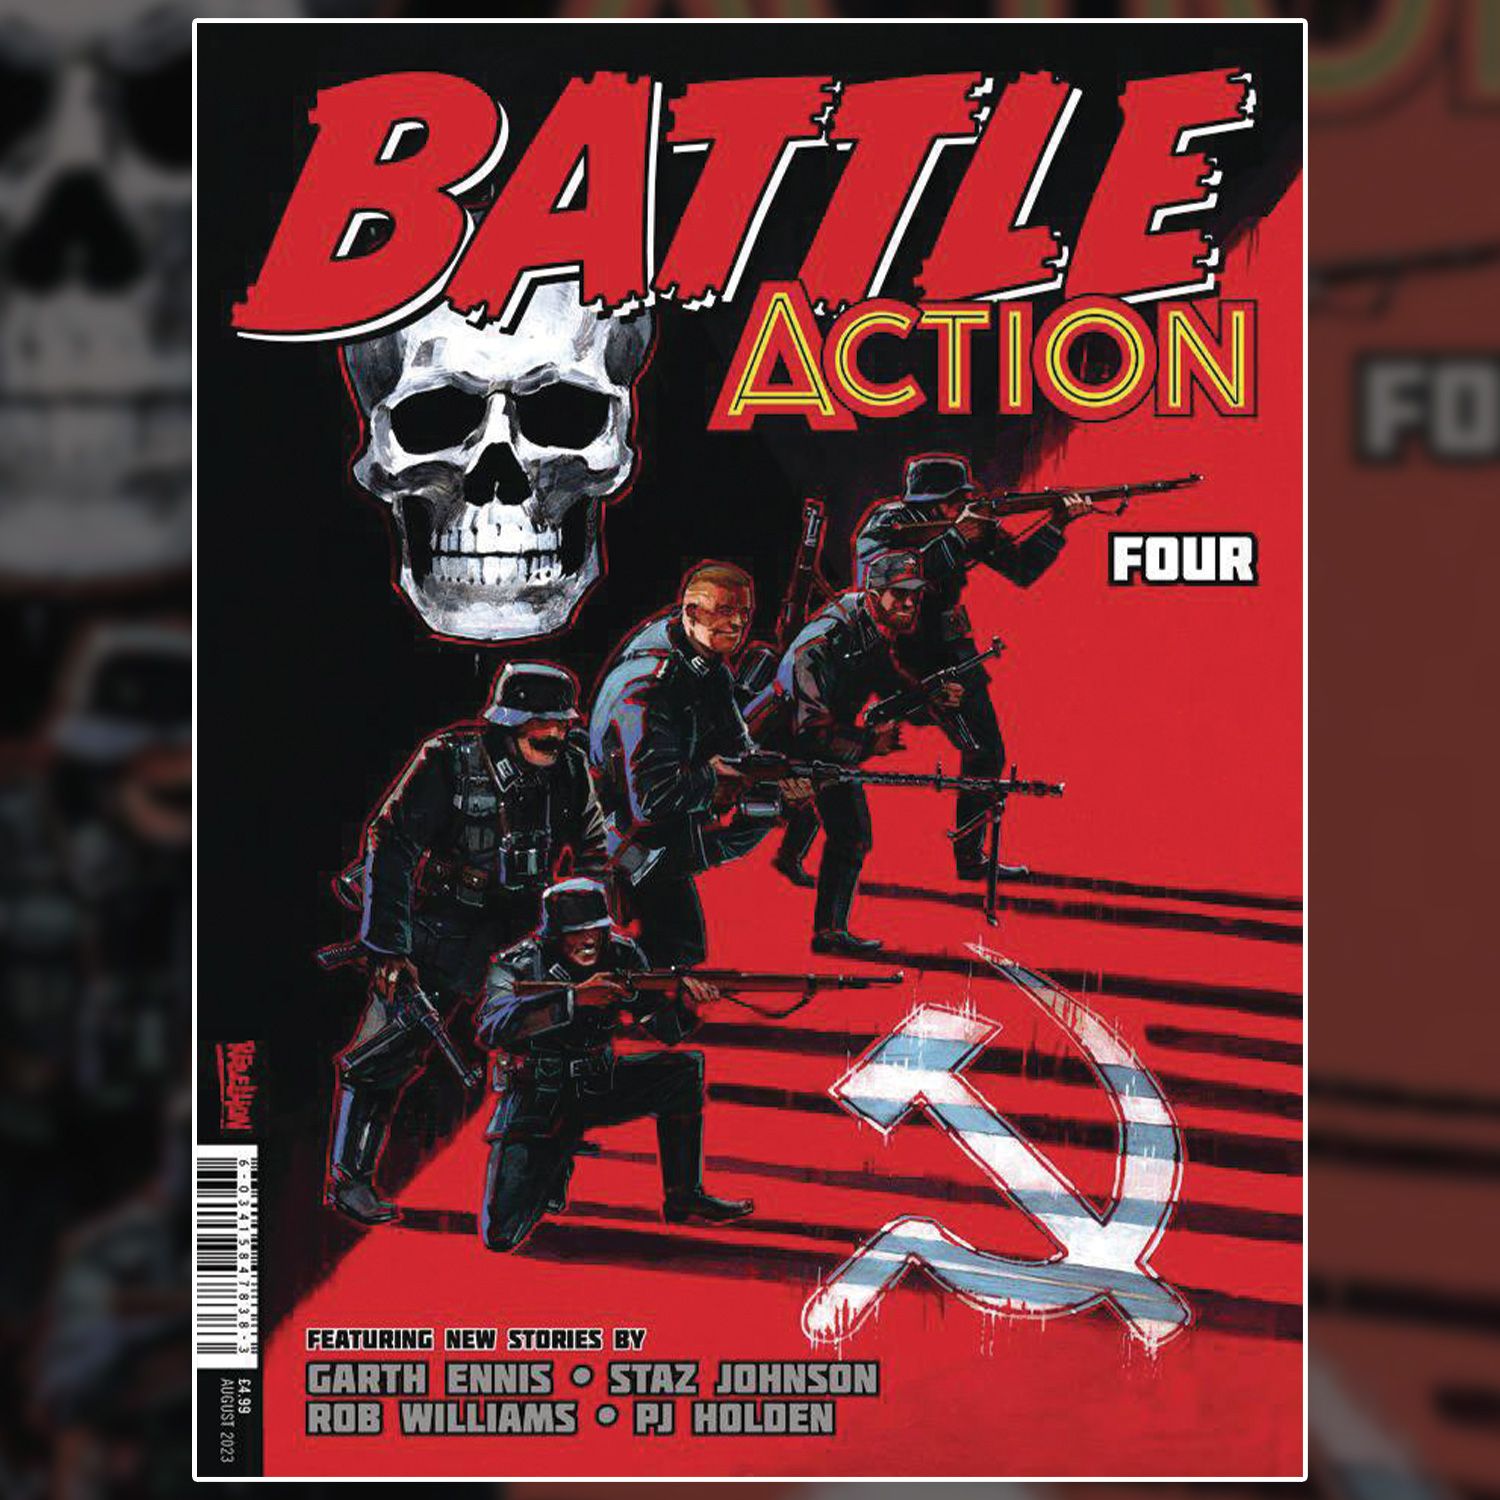 BATTLE ACTION #4 out now!